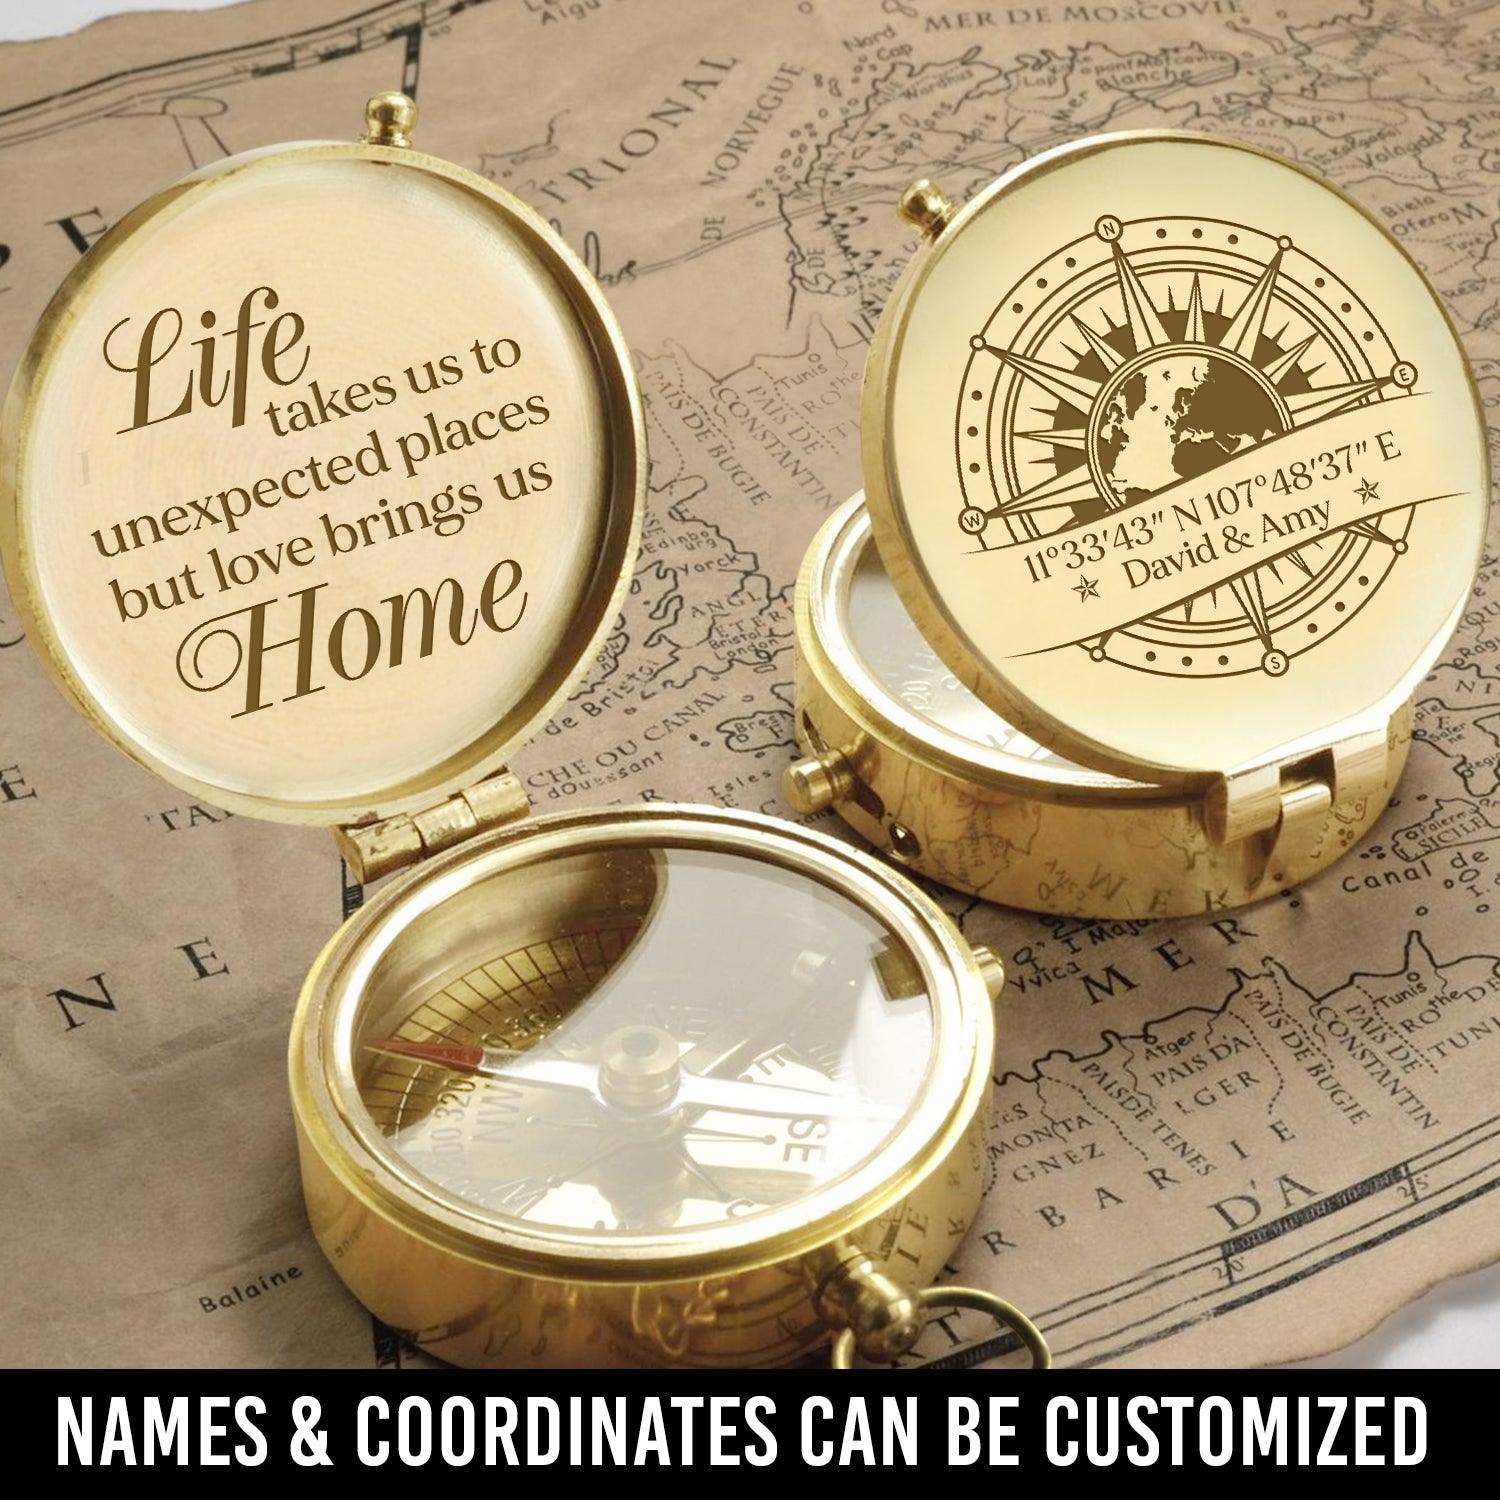 Personalised Engraved Compass - Family - To Couple - Love Brings Us Home - Augpb26012 - Gifts Holder